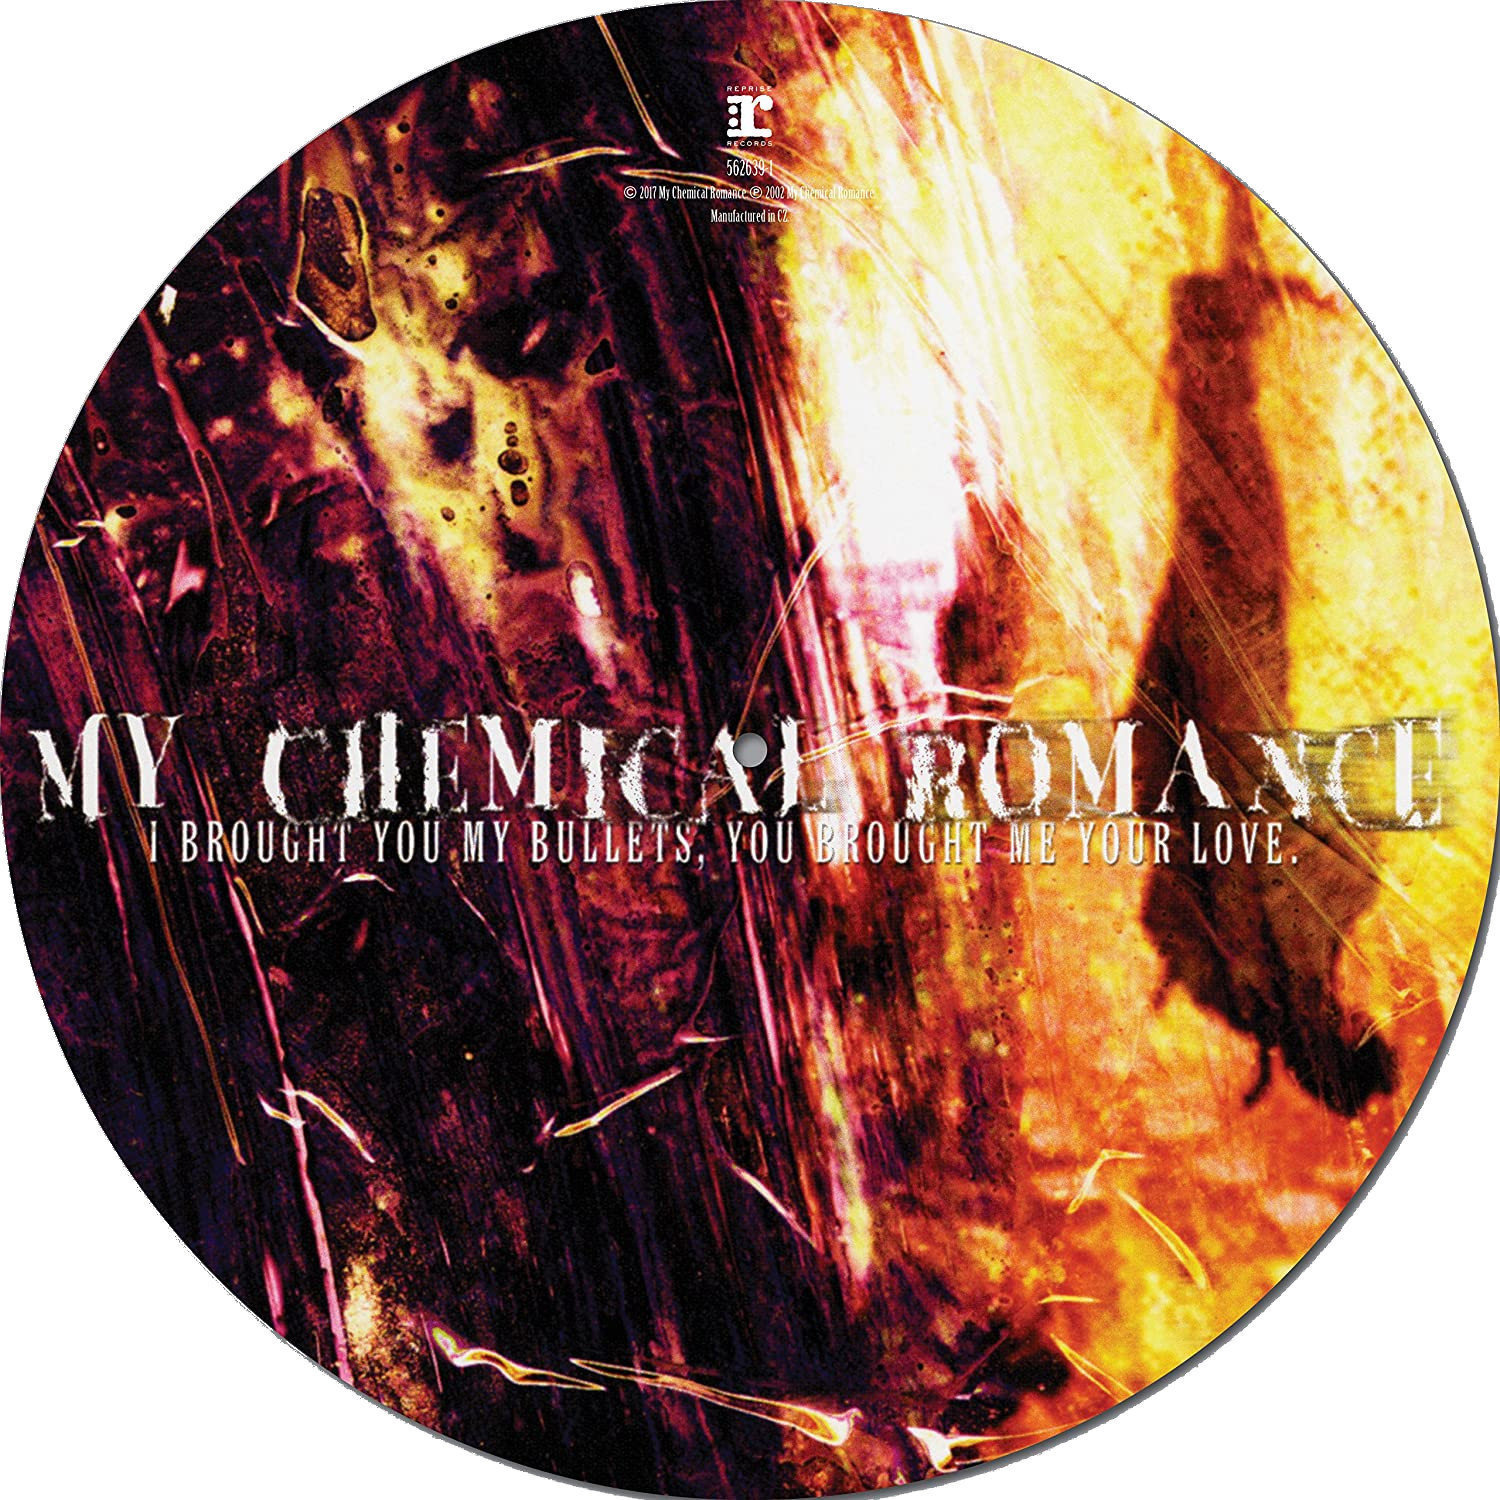 Vinyylilevy My Chemical Romance - I Brought You My Bullets, You Brought Me Your Love (Picture Disc) (LP)